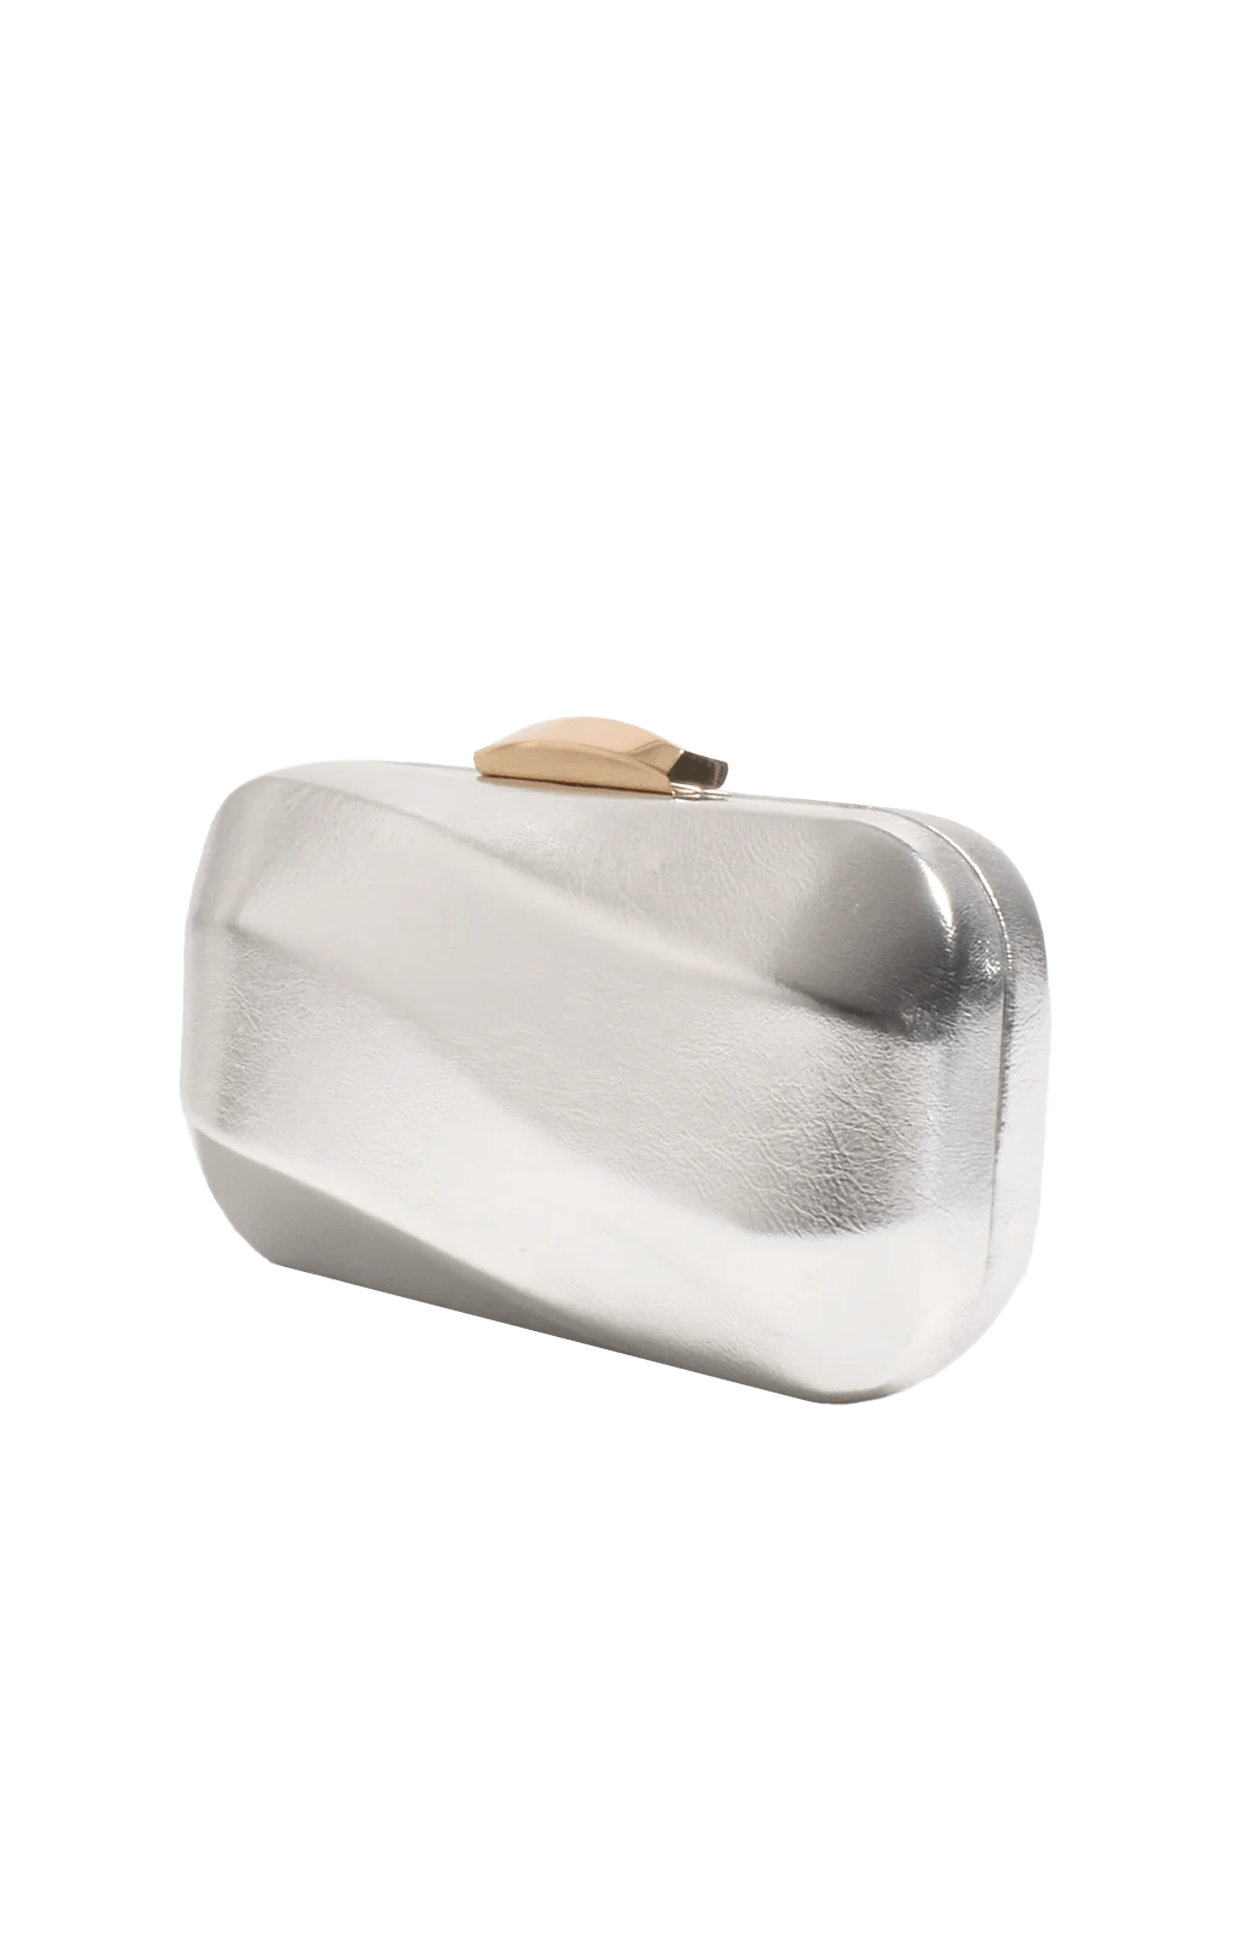 Bags OS / SILVER WAVY STRUCTURED METALLIC CLUTCH IN SILVER